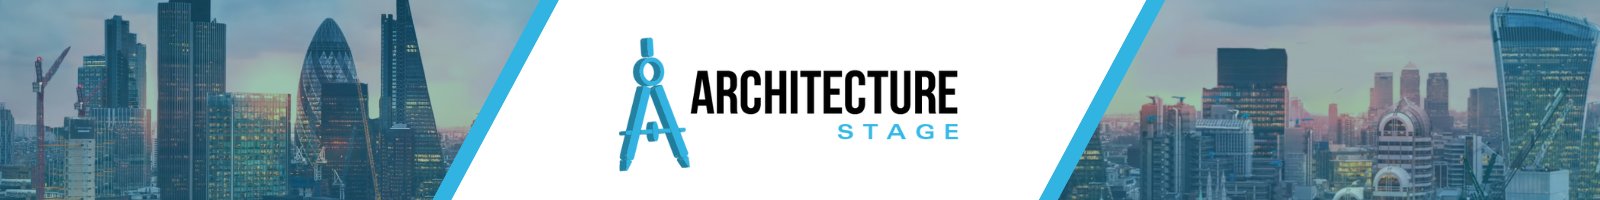 Architecture Stage